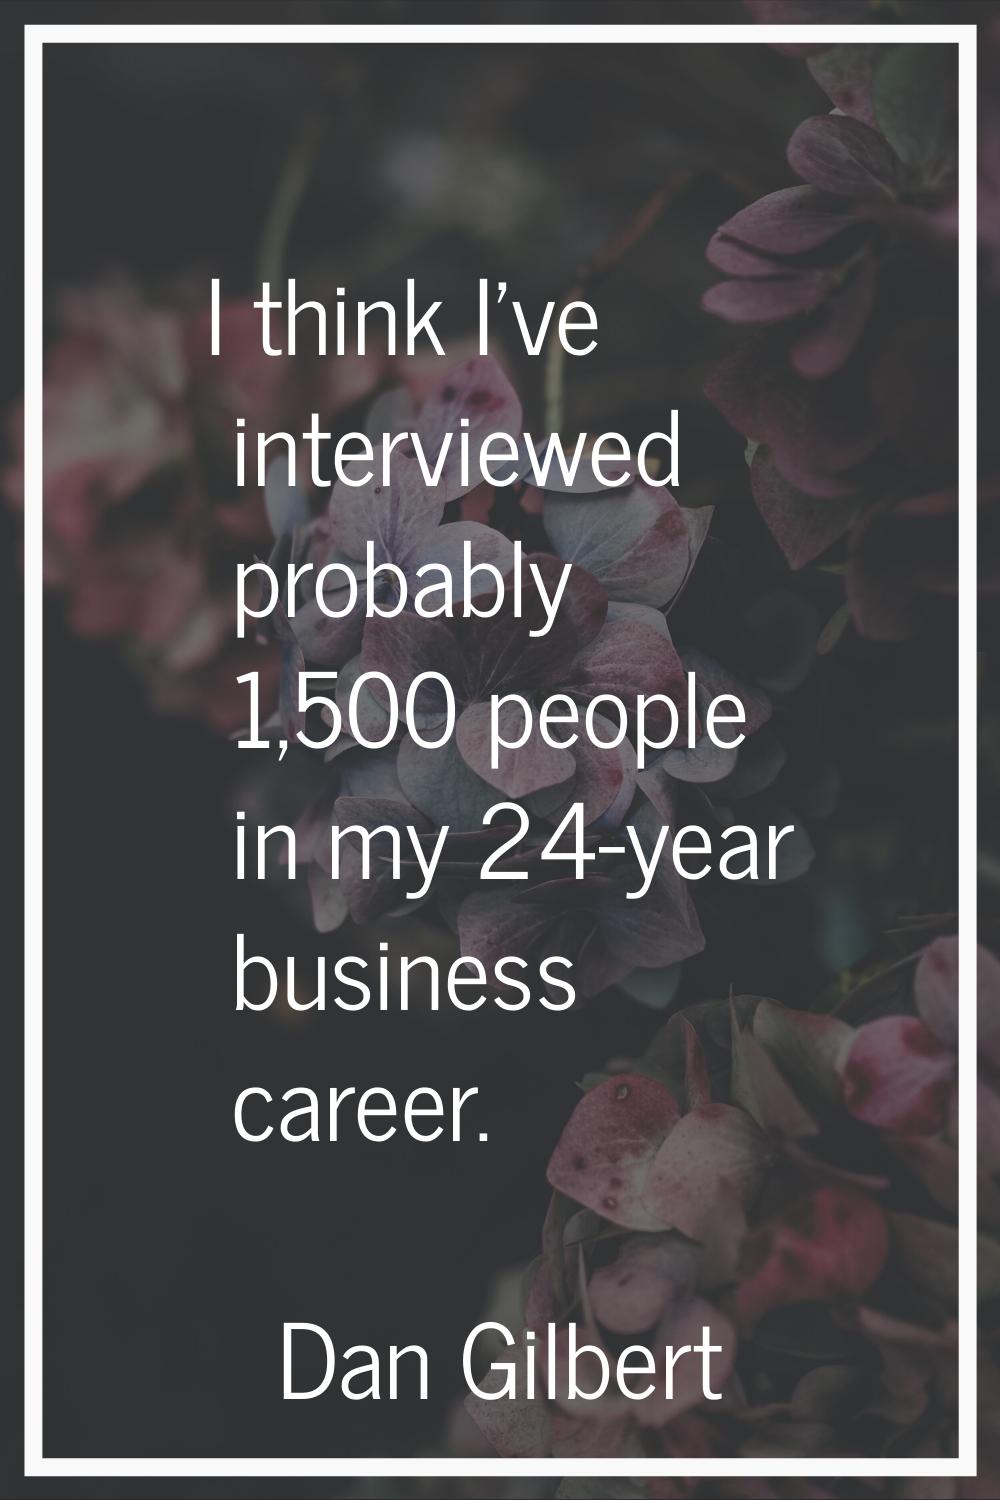 I think I've interviewed probably 1,500 people in my 24-year business career.